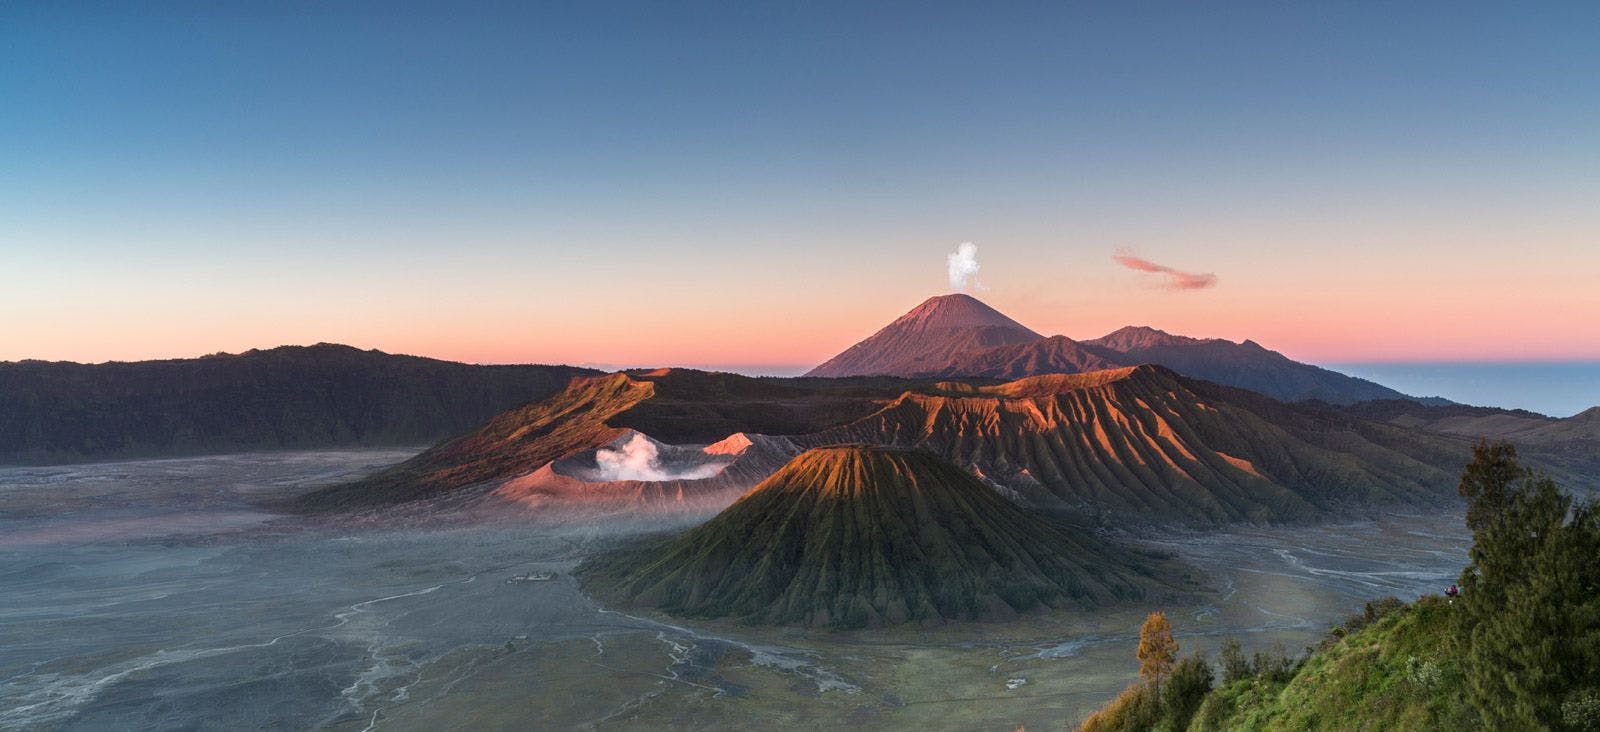 Volcanic landscape in Indonesia at sunset